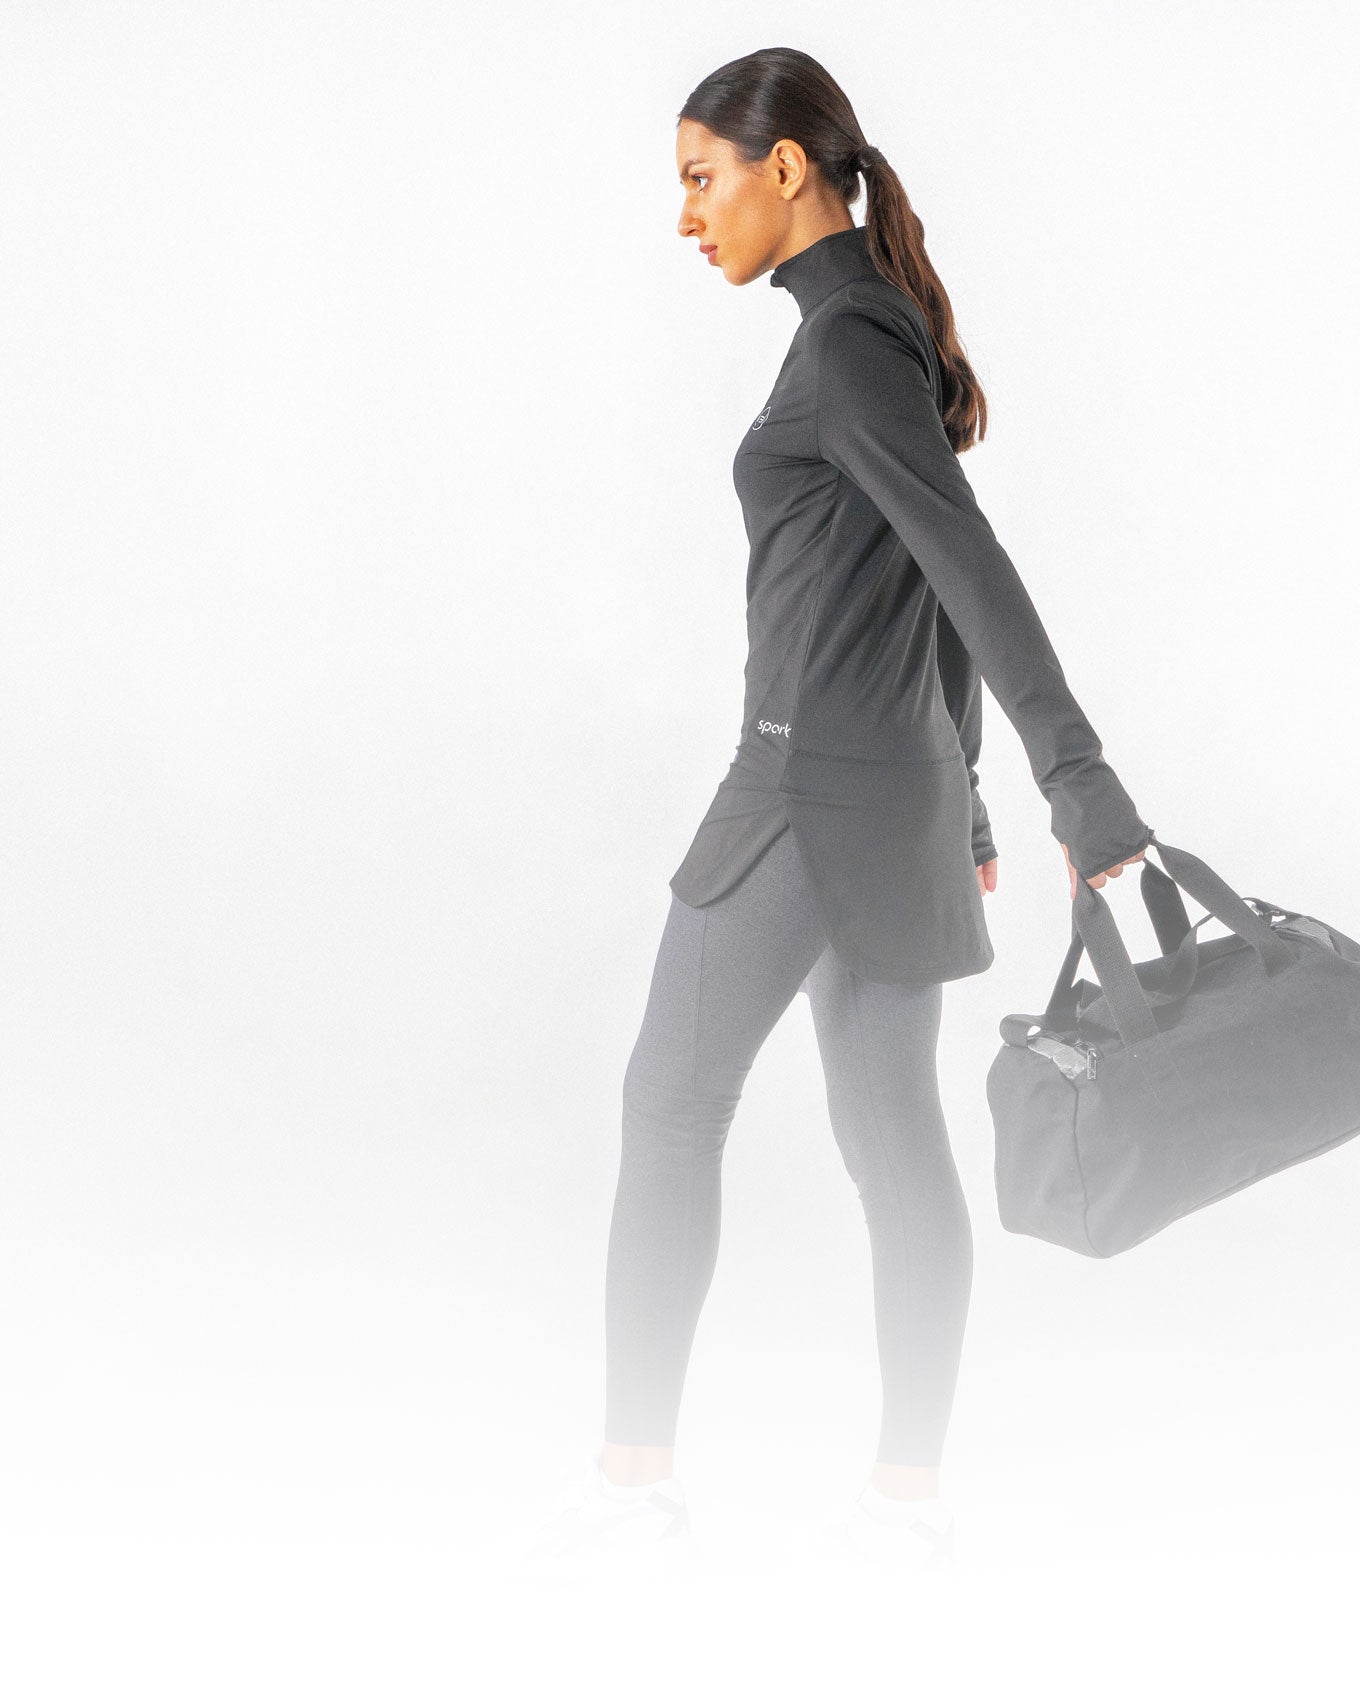 A female holding a gym bag while wearing a black Spark Half-Zip, a modest activewear sweatshirt from Veil Garments.